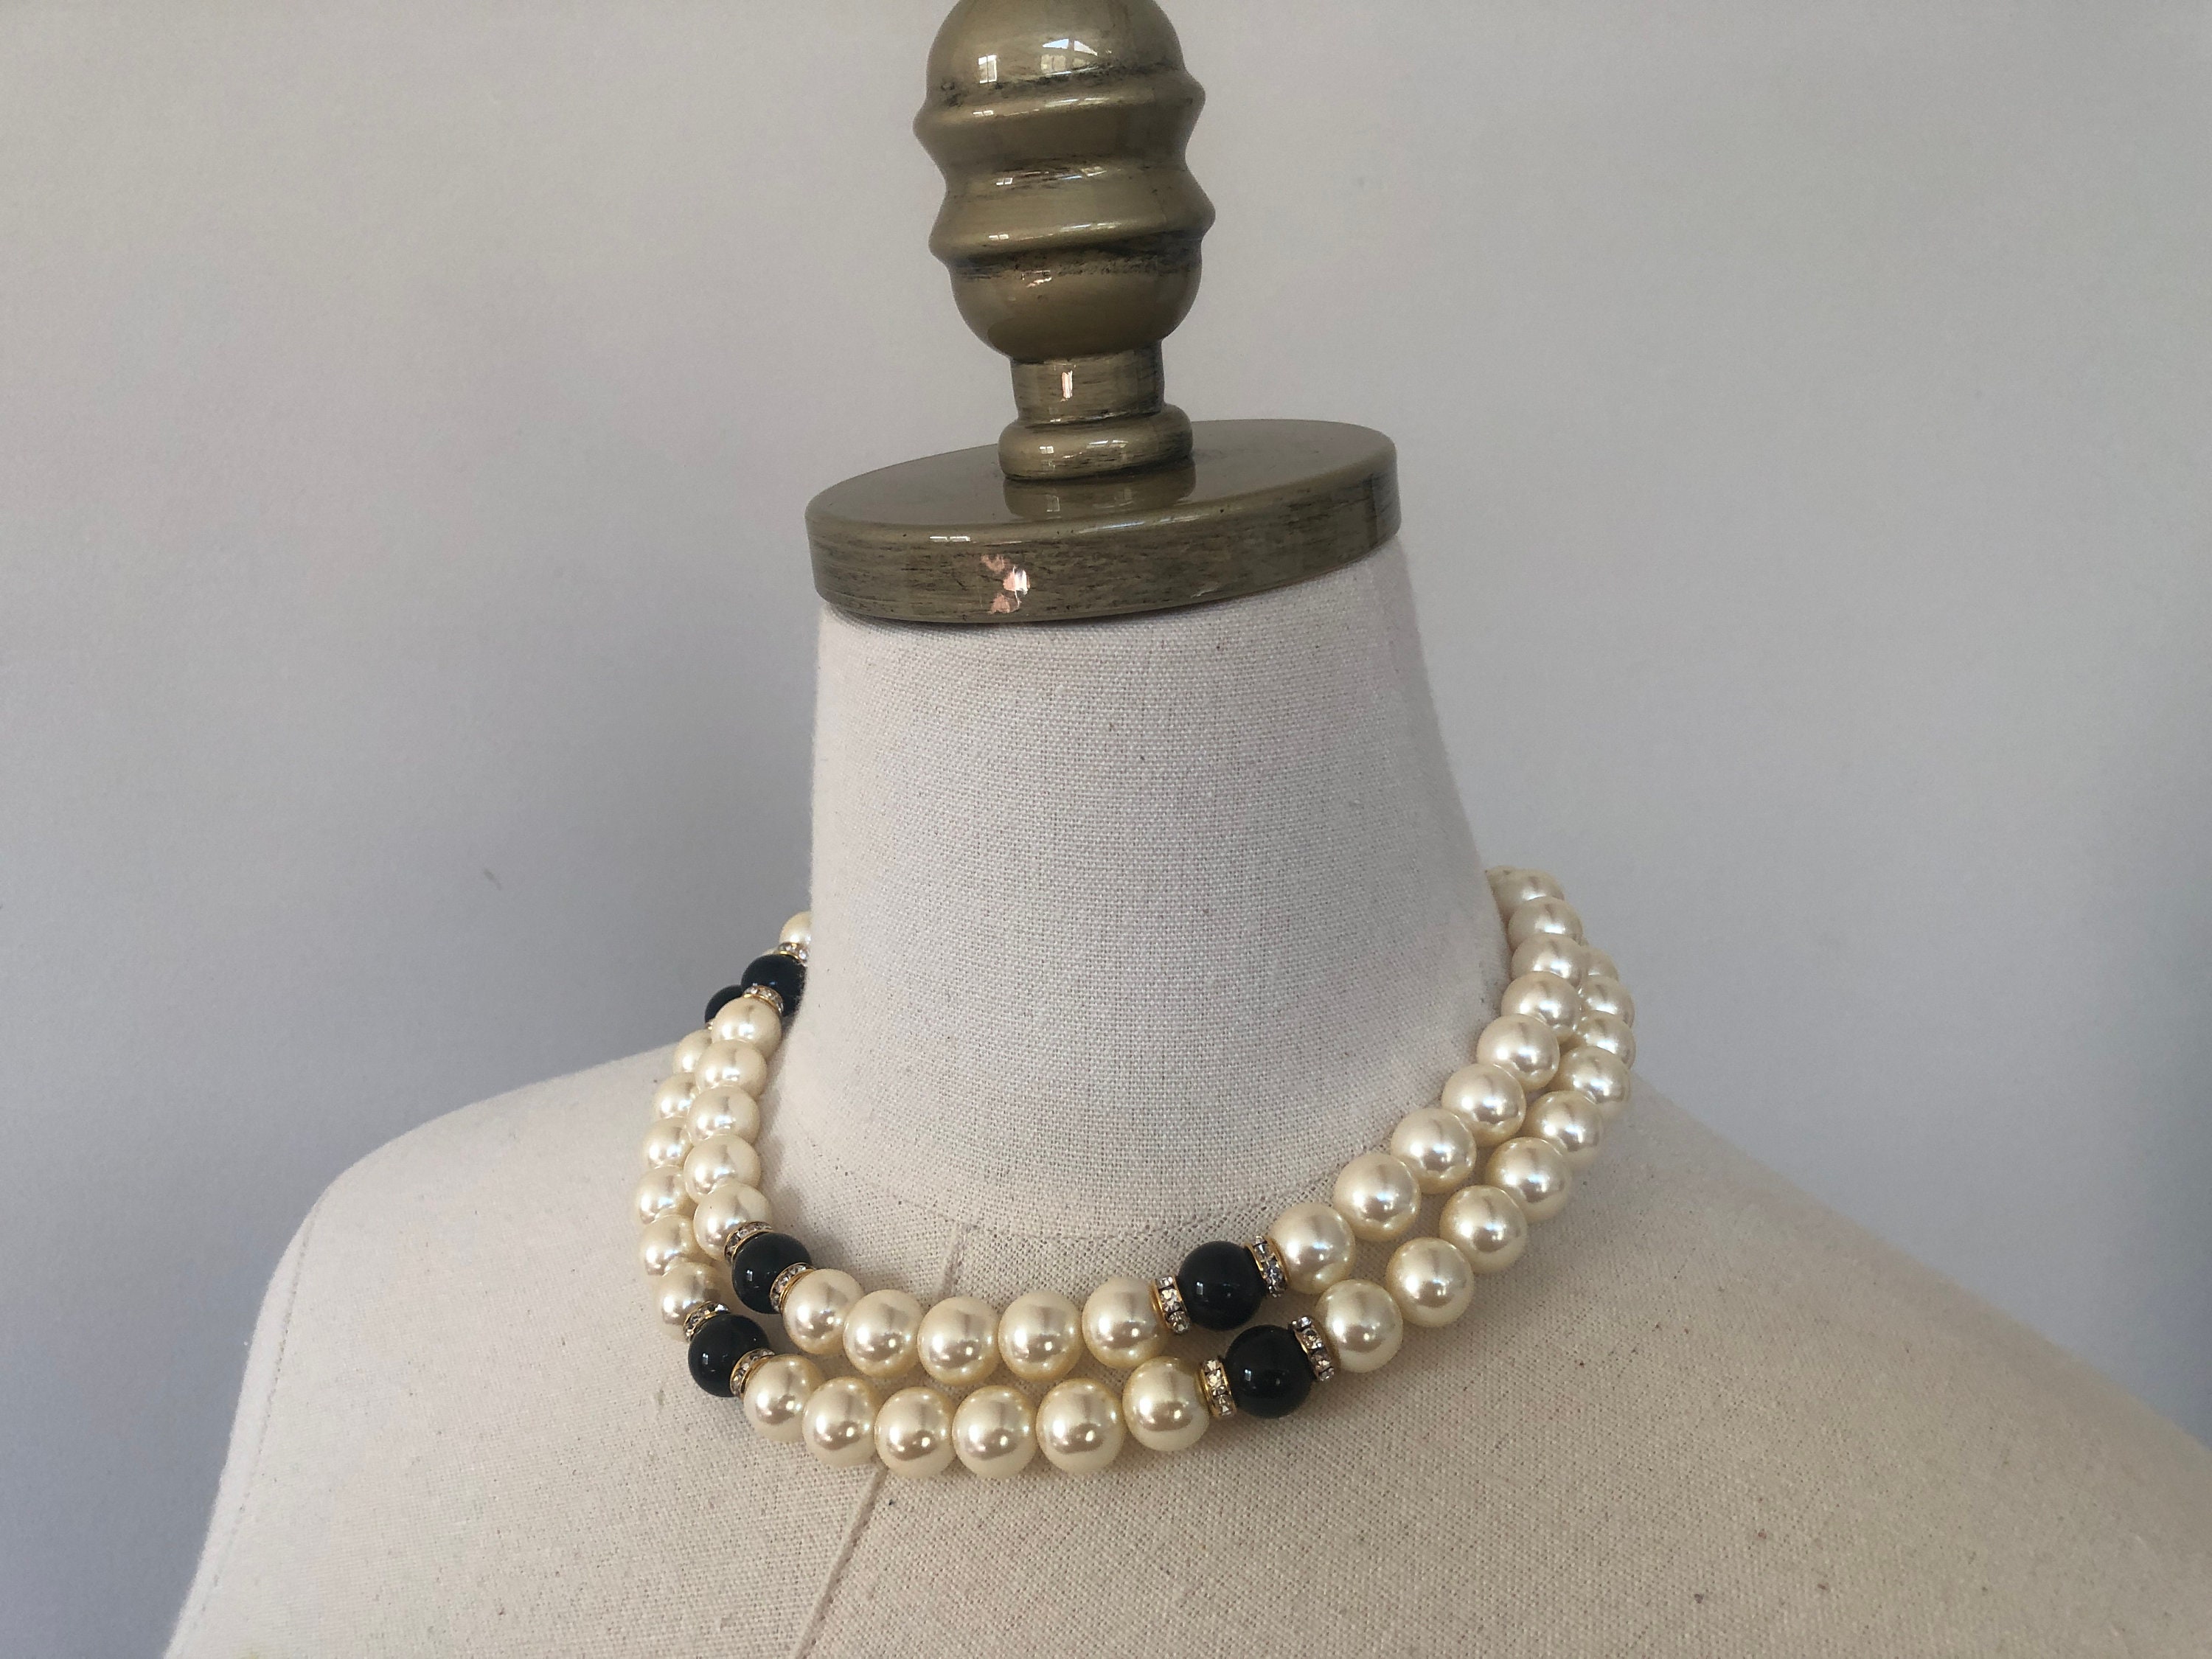 At Auction: Vintage Faux Pearl Multi-Strand Necklace, 26